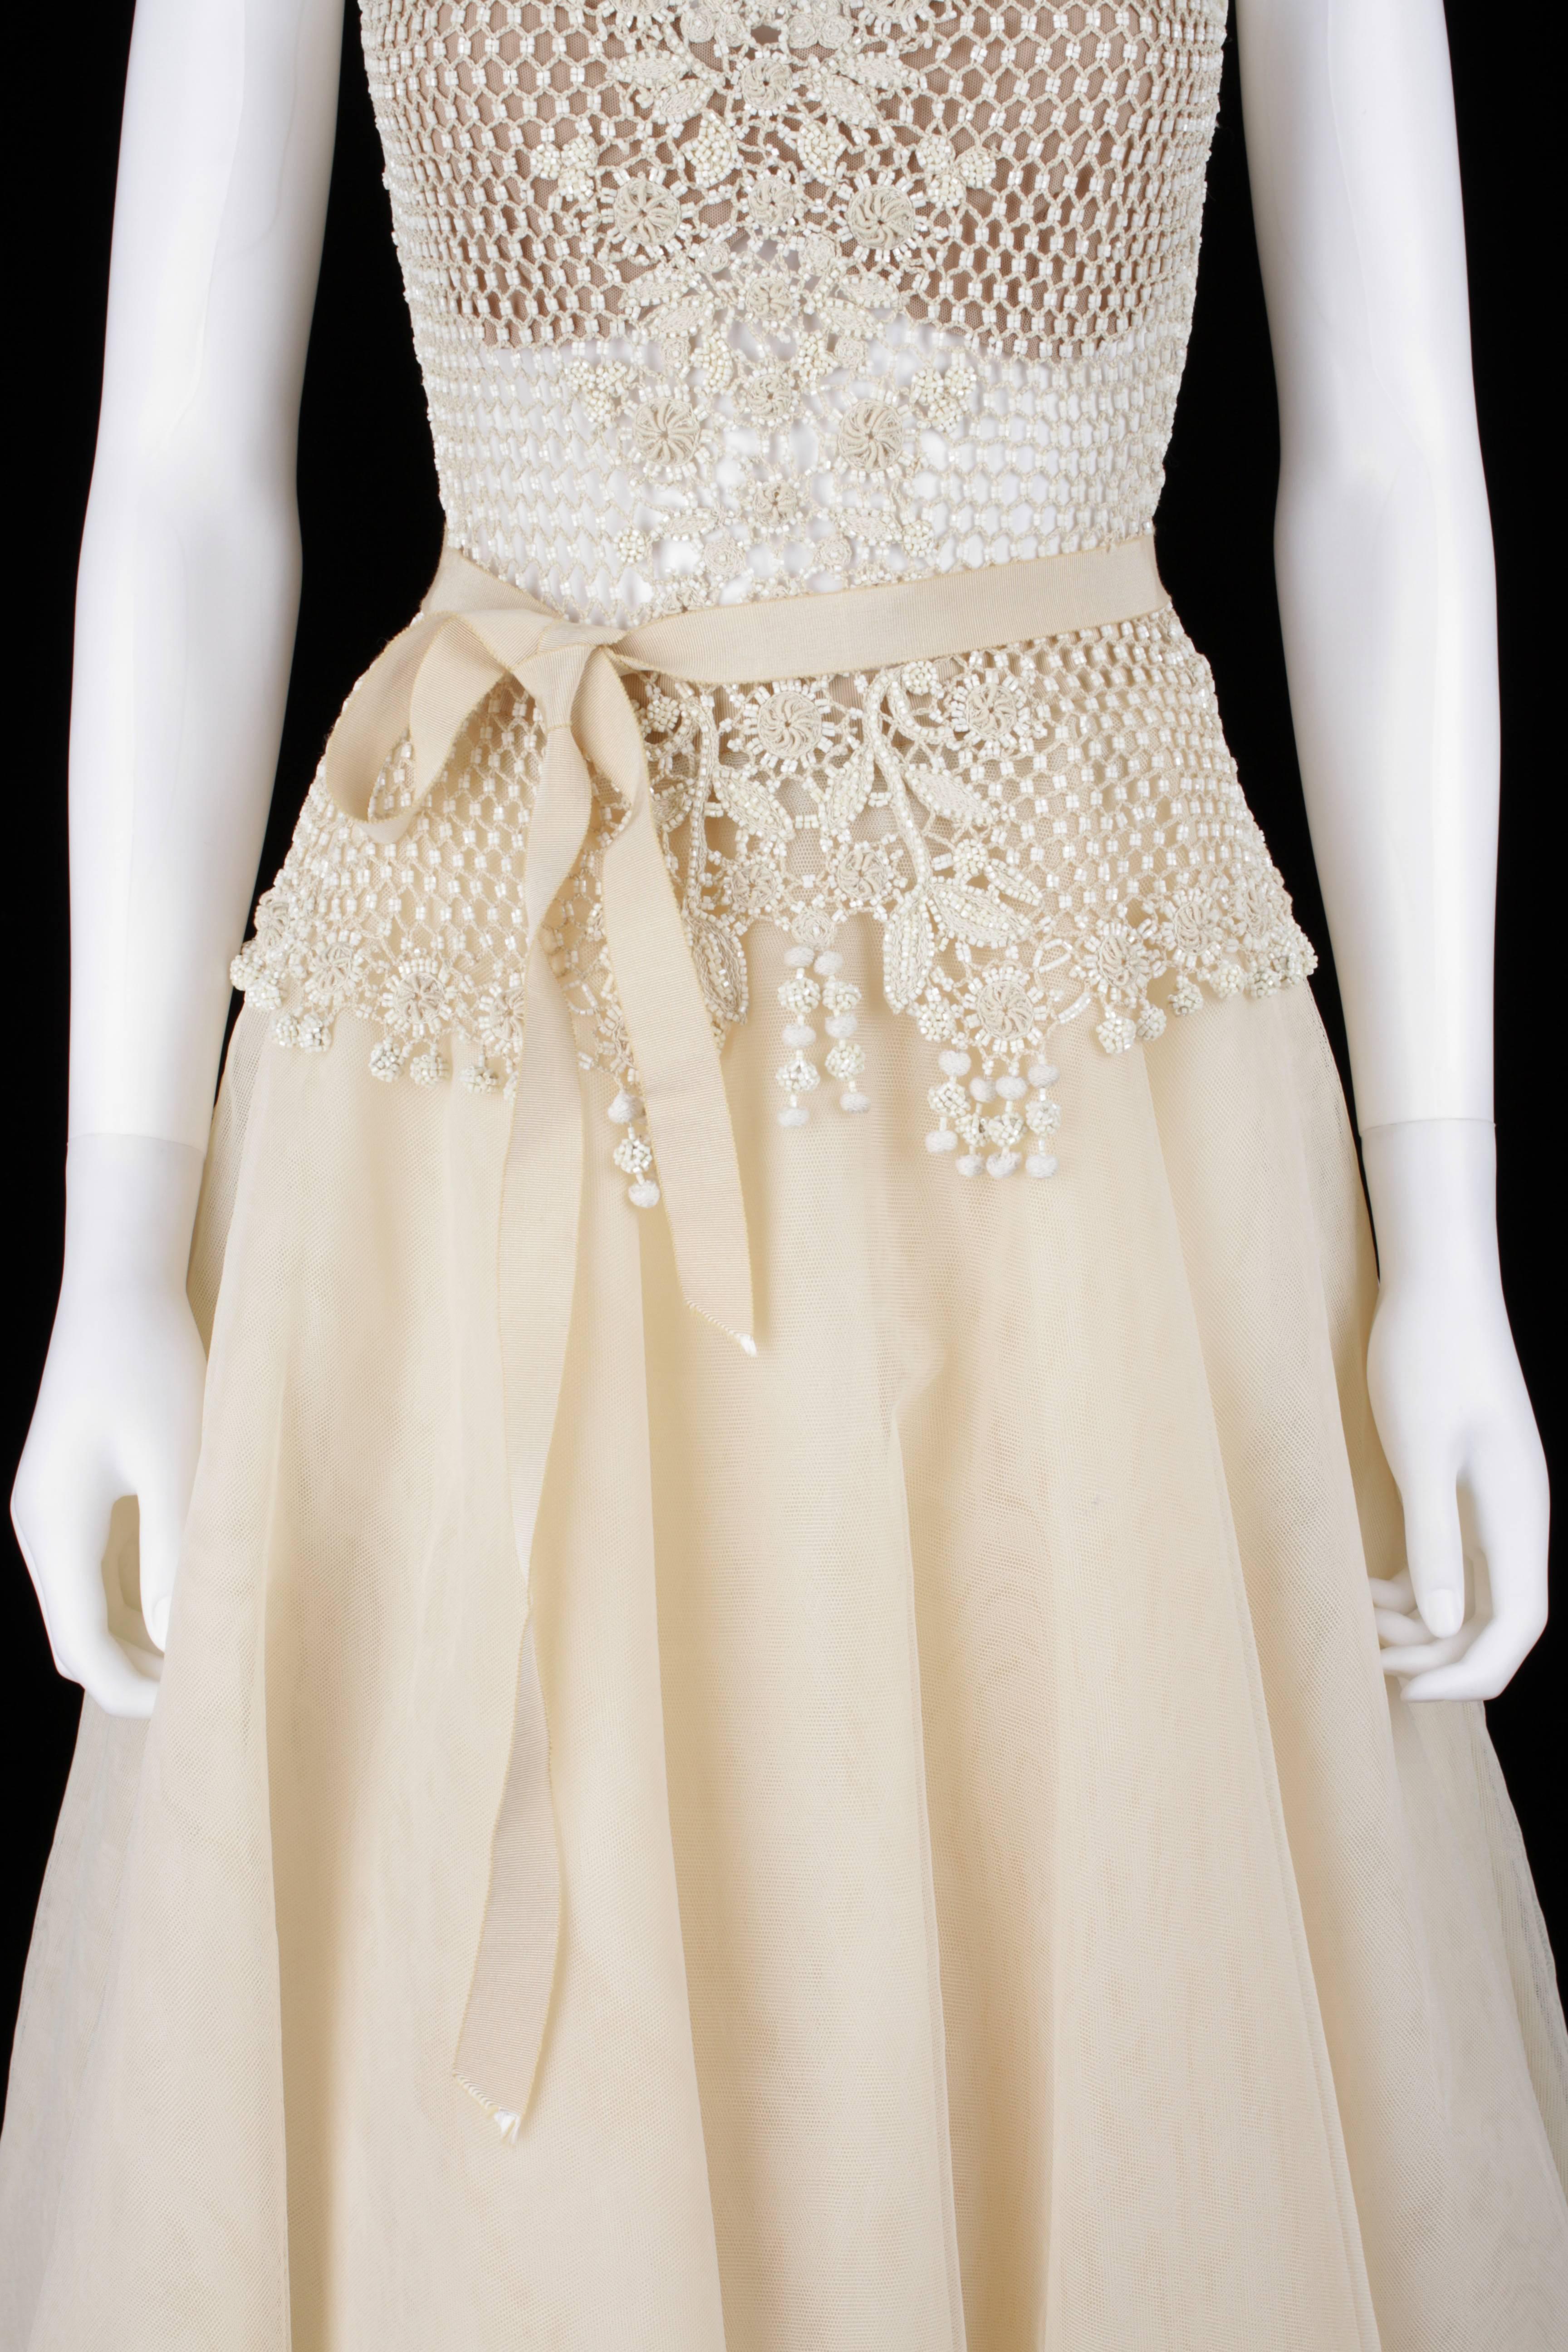 OSCAR de la RENTA 2 piece Ivory Beaded Crochet Top Tulle Skirt Set 6 S/S 2004 In Good Condition For Sale In Thiensville, WI